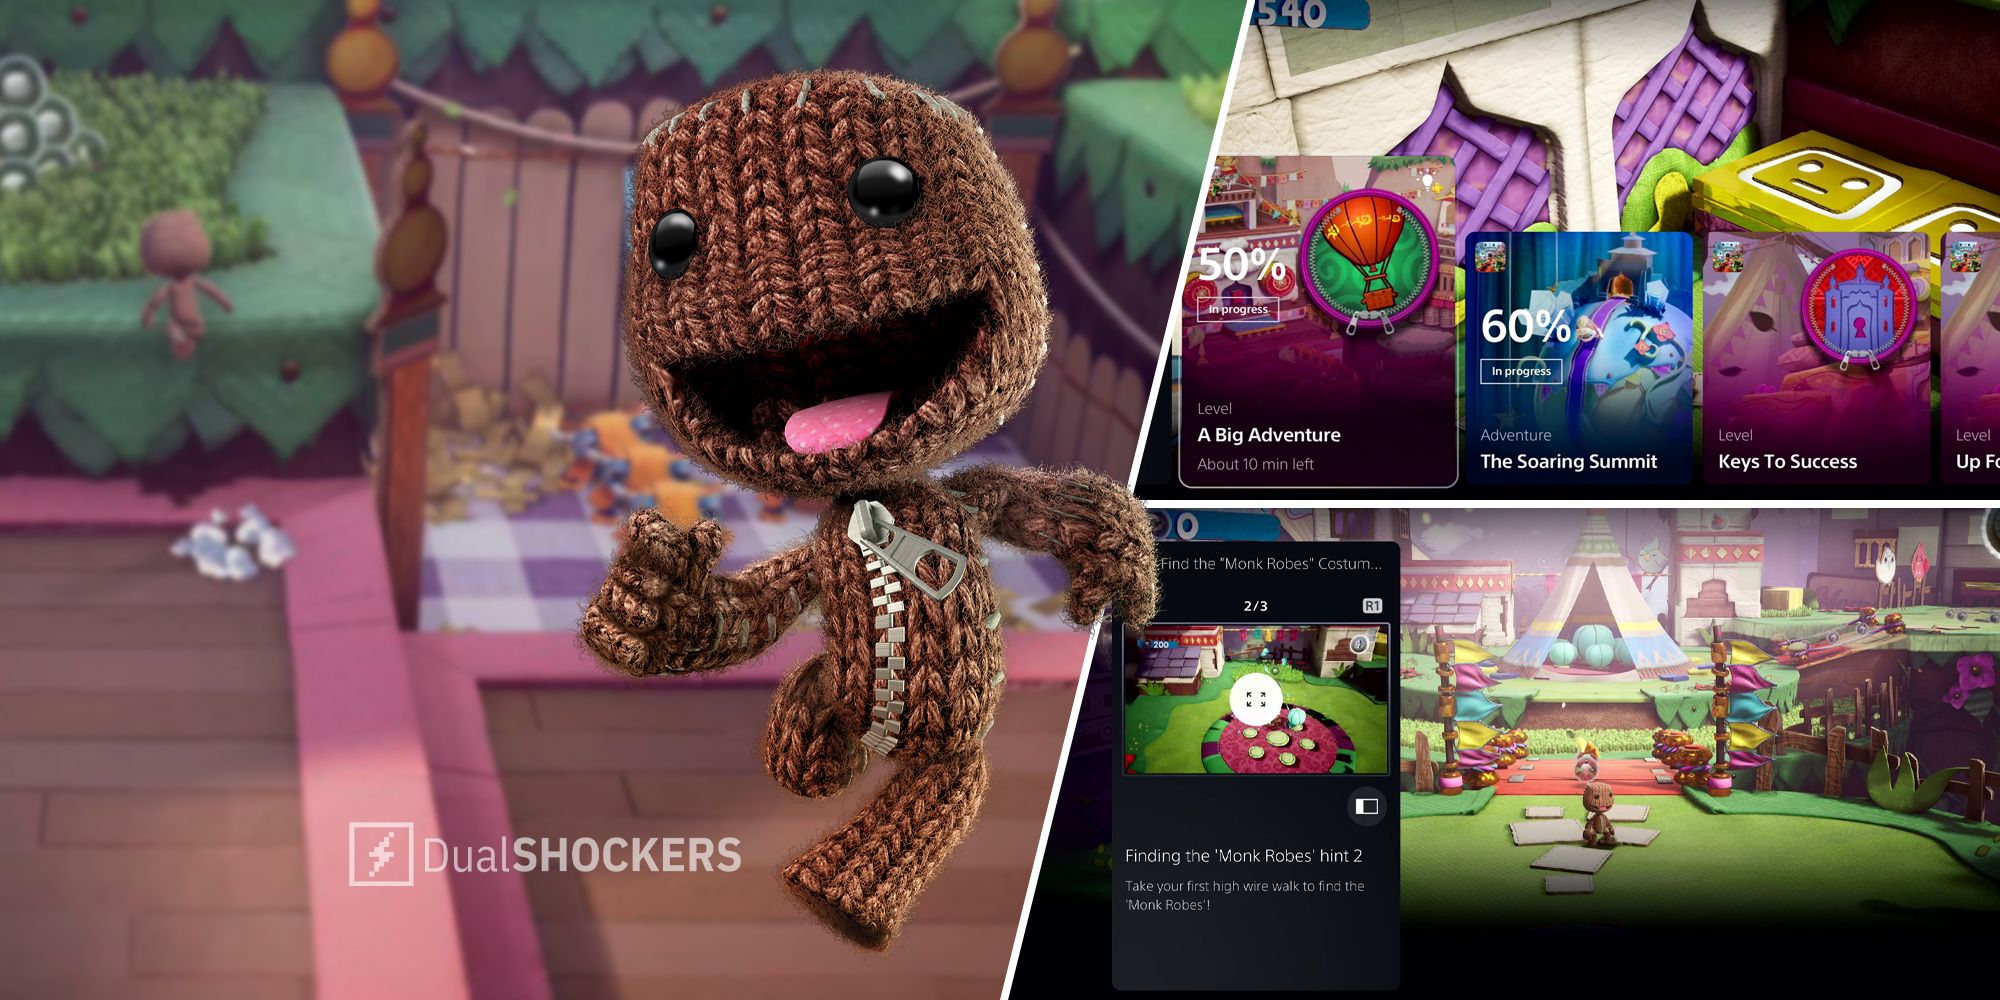 PS5 Sackboy A Big Adventure on left, activity cards on top and bottom right